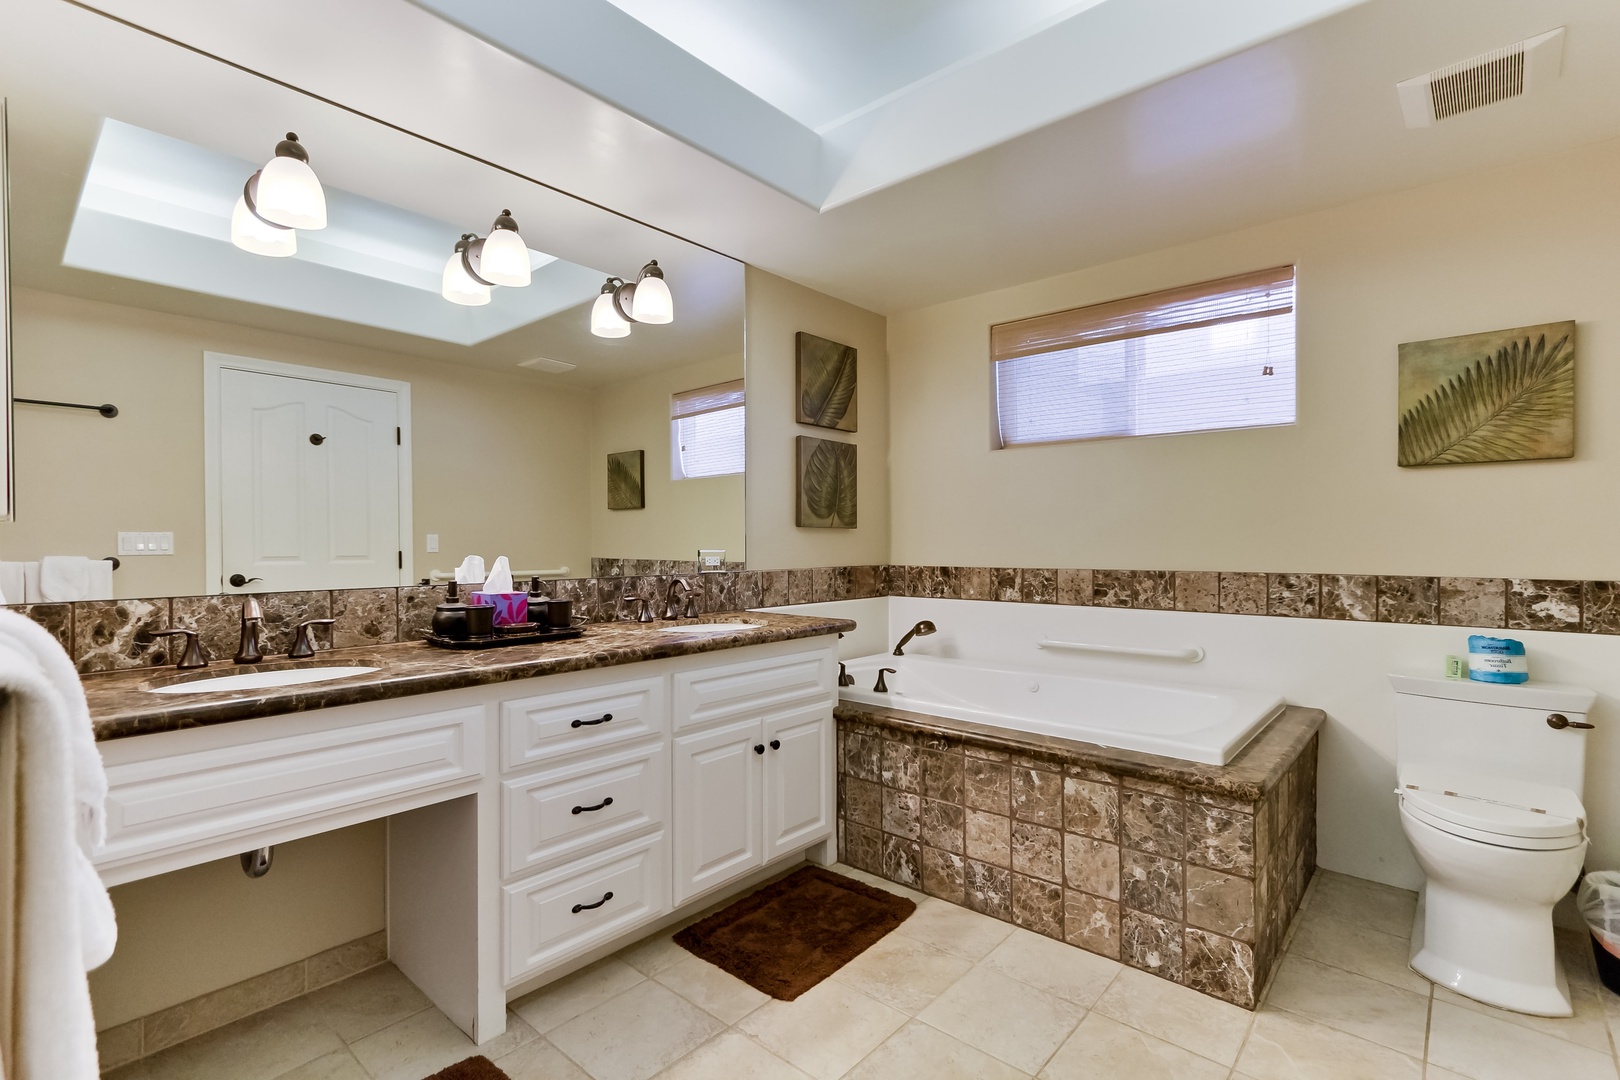 Primary suite bath with soaking tub